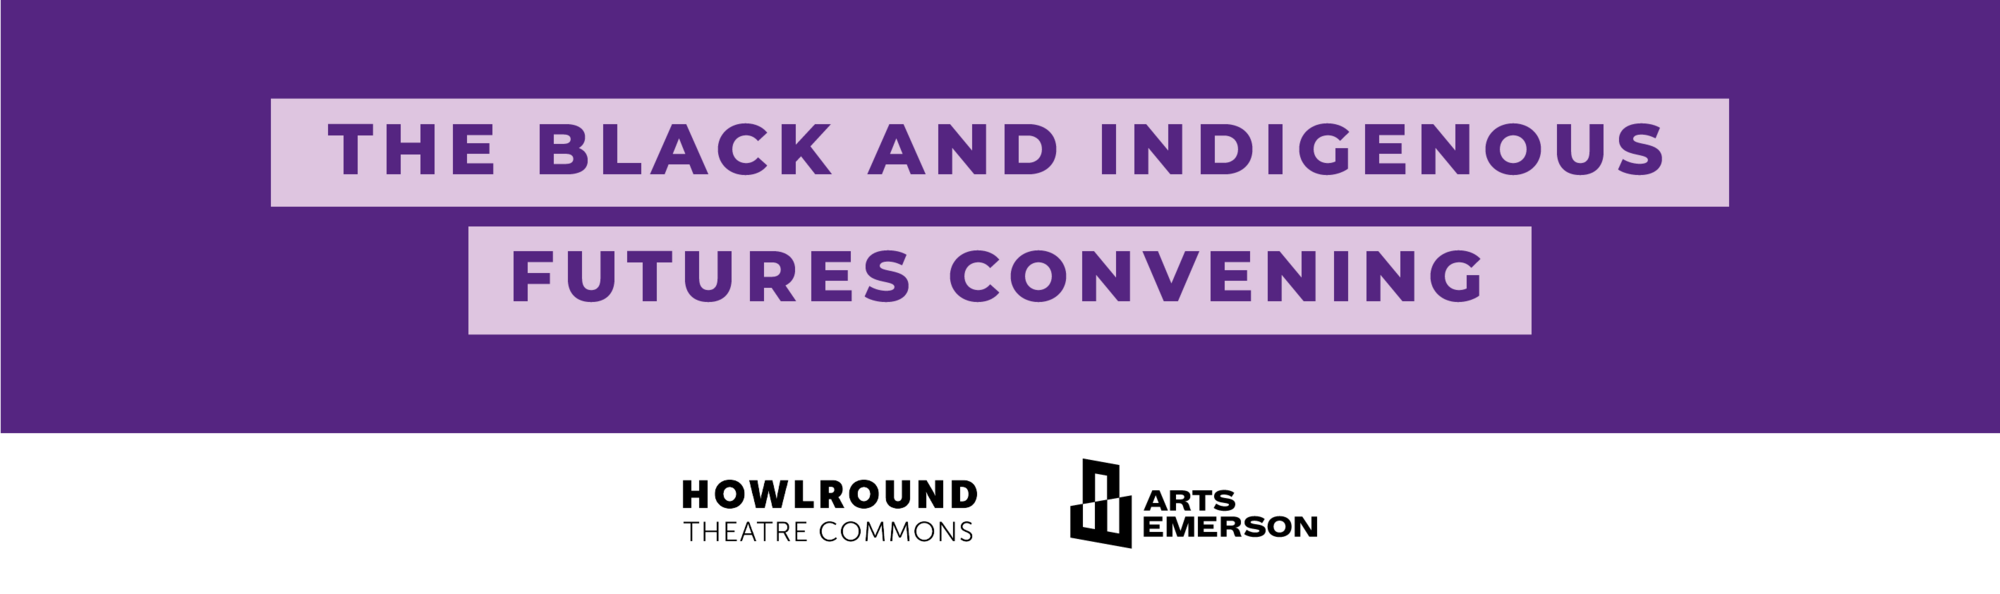 The Black and Indigenous Futures convening